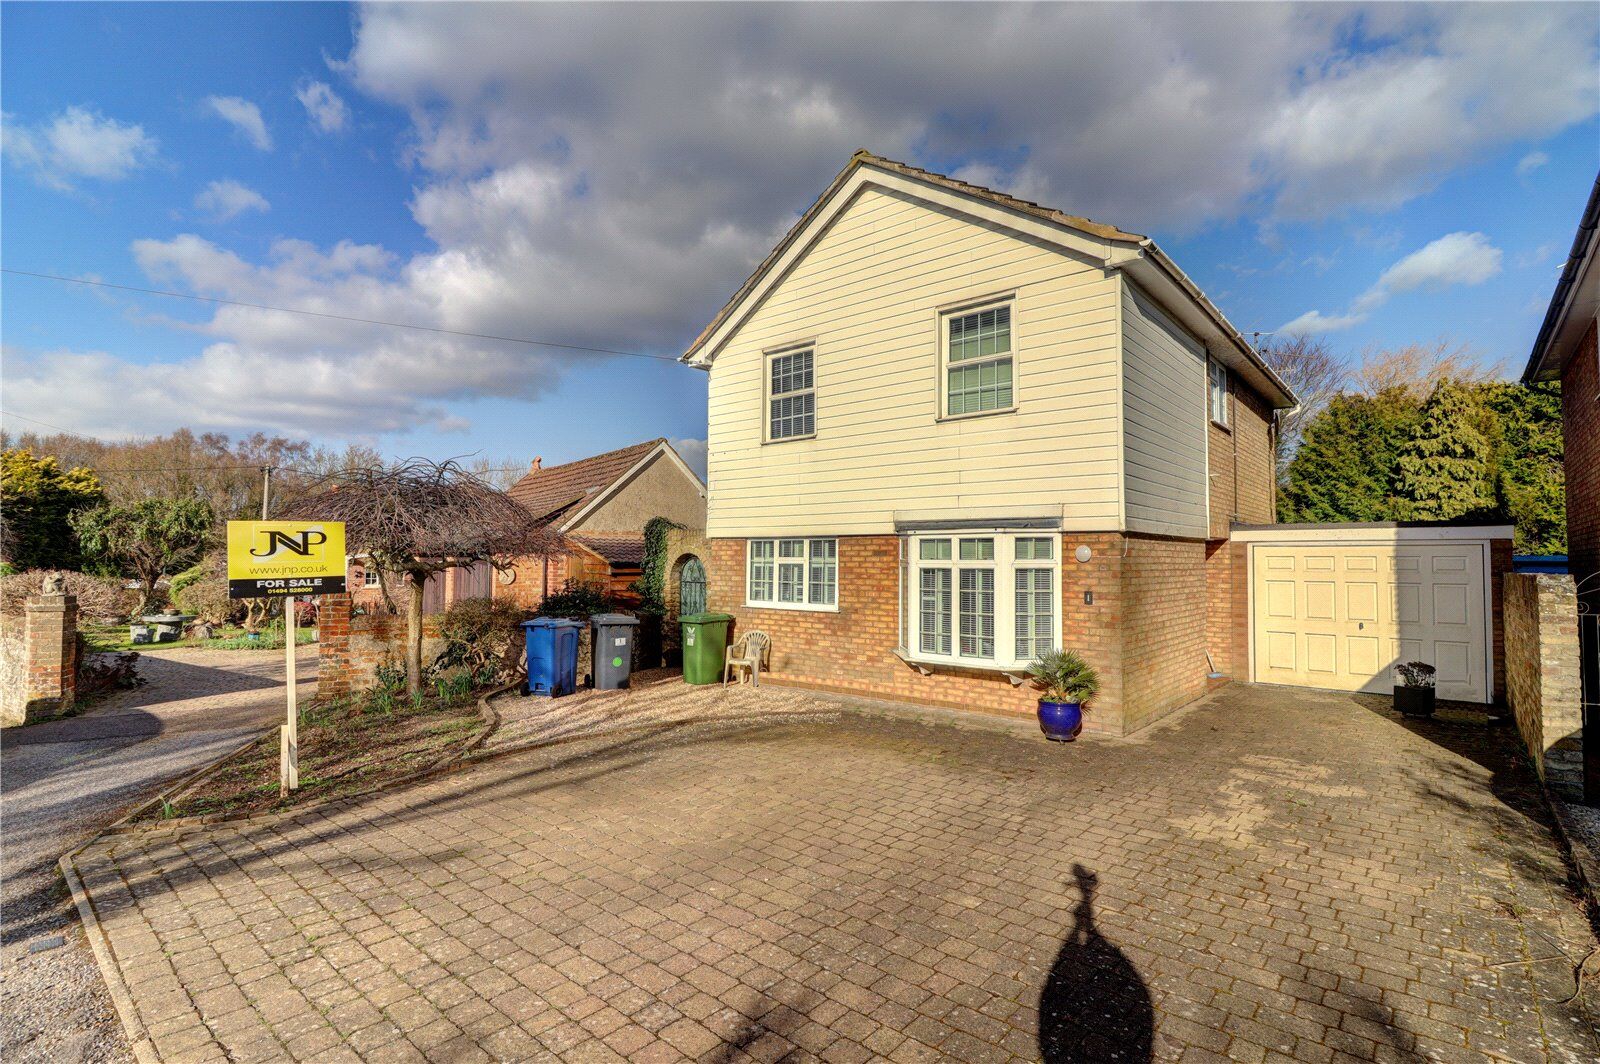 4 bedroom detached house for sale Narrow Lane, Downley, HP13, main image